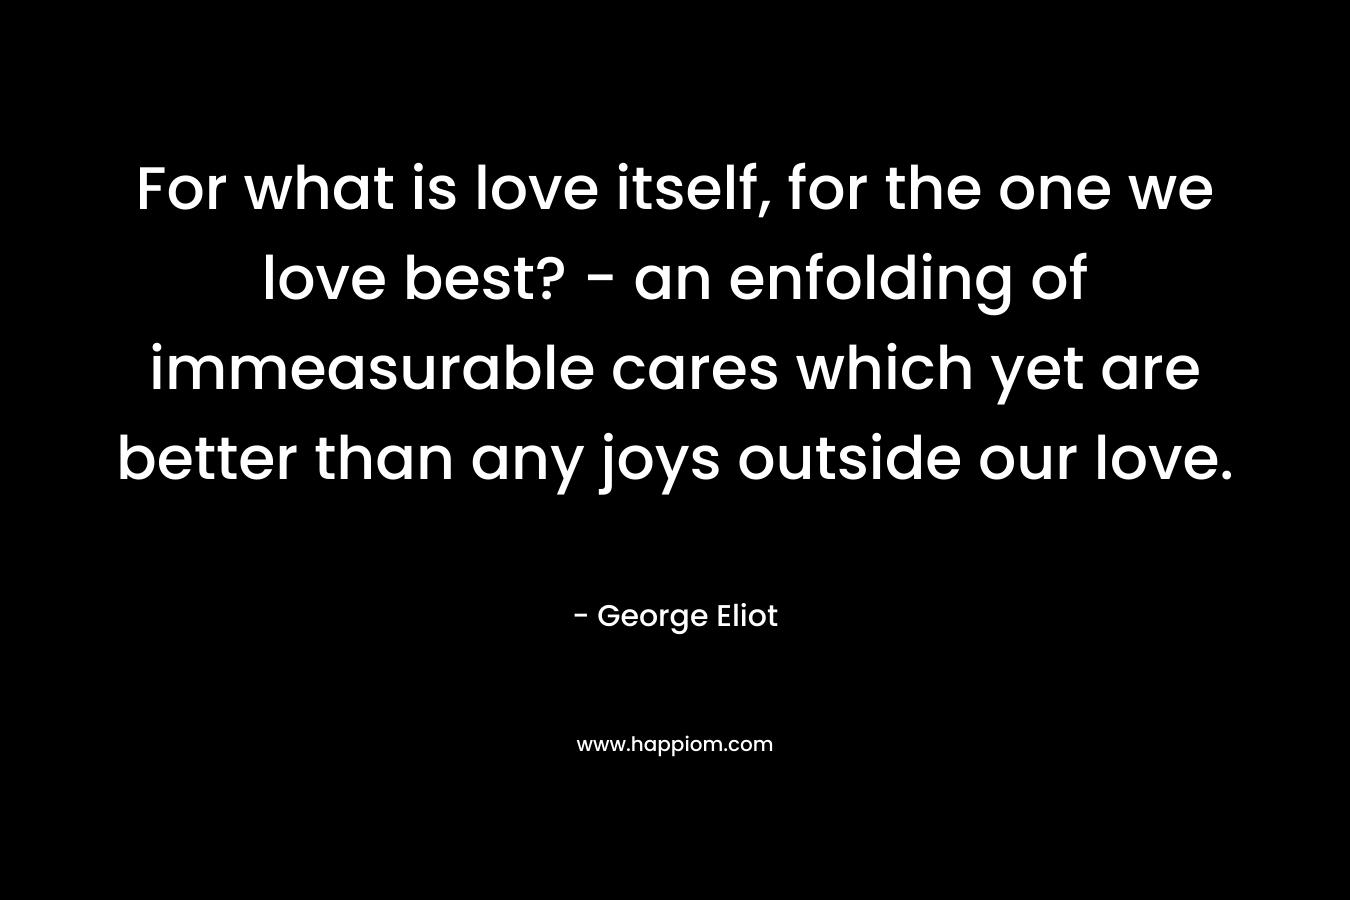 For what is love itself, for the one we love best? - an enfolding of immeasurable cares which yet are better than any joys outside our love.